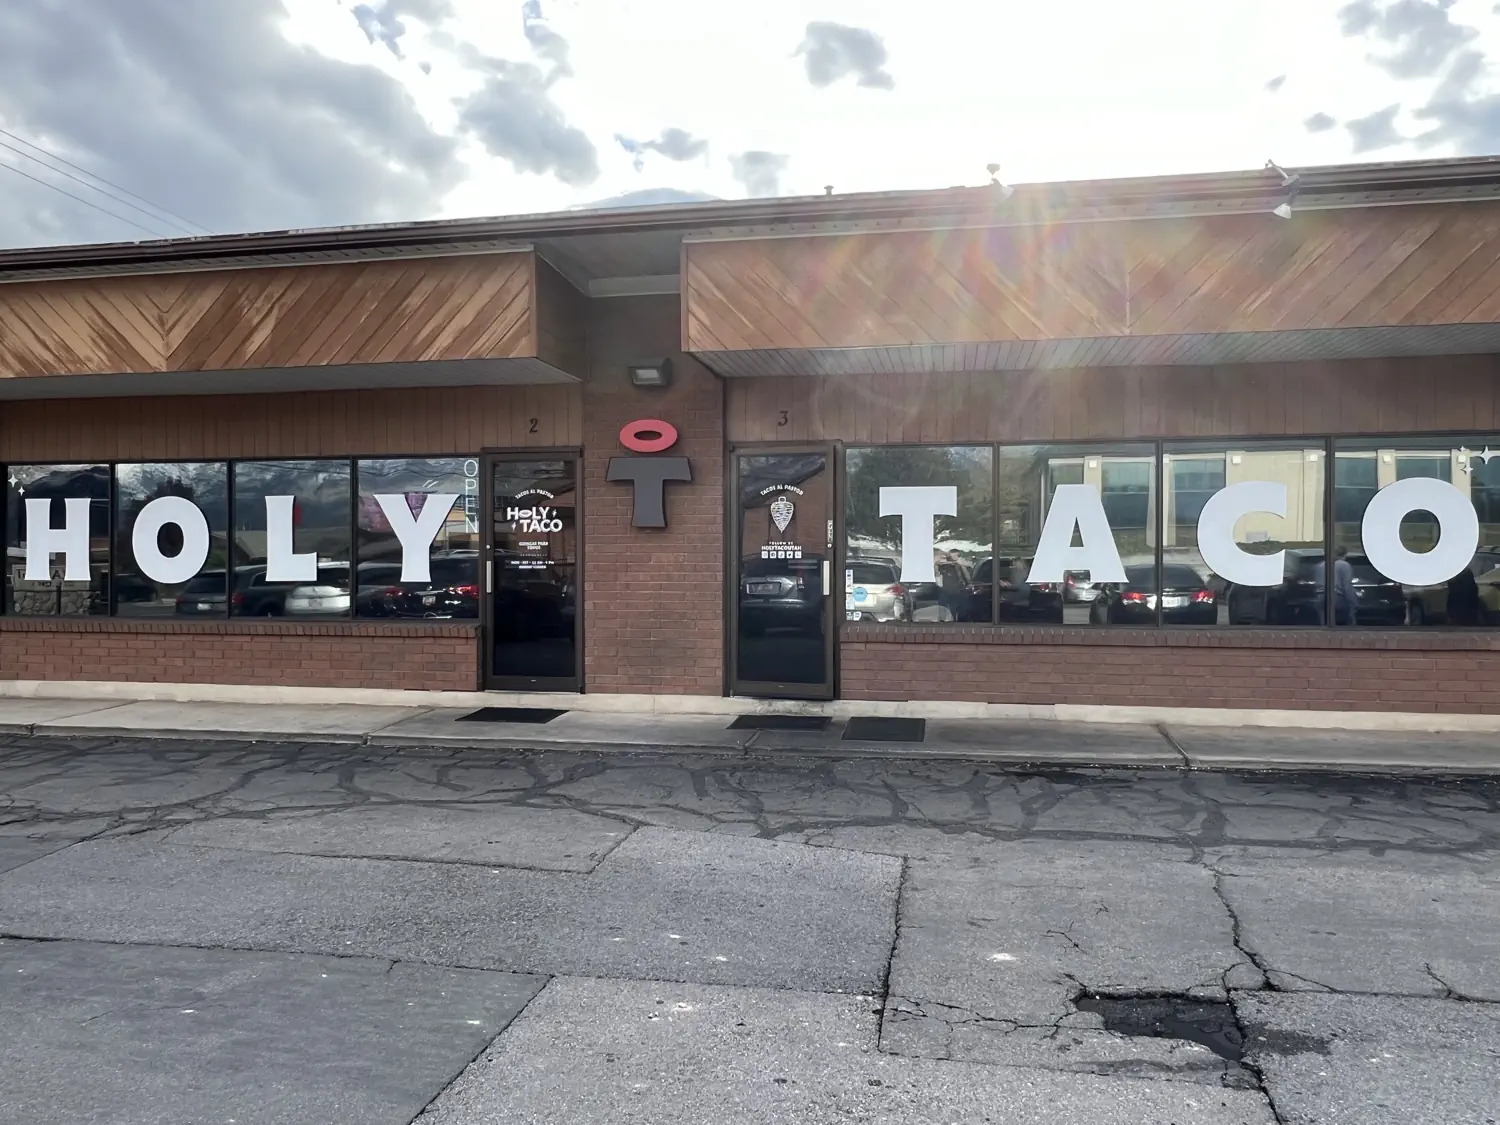 Storefront for The Holy Taco in Orem, UT